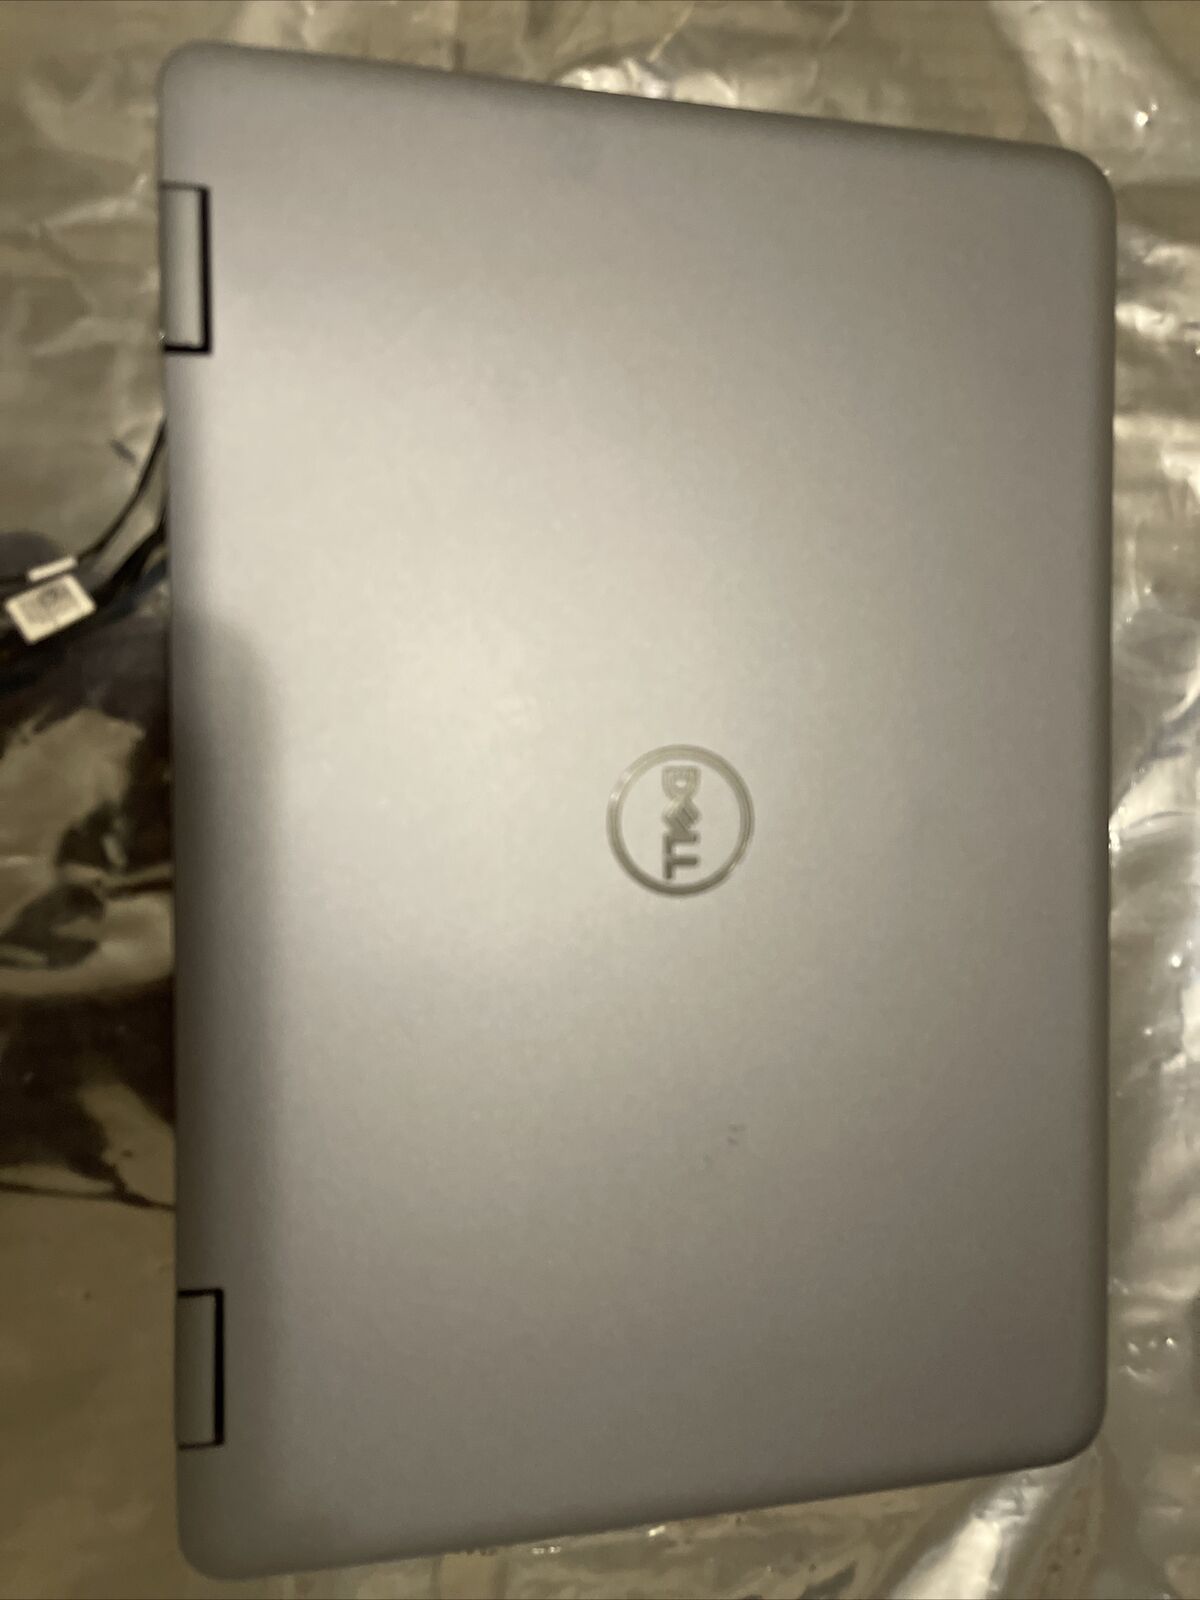 Dell OEM Inspiron 3195 2-in-1 11.6" LCD Back Cover Lid Gray W Hinges NCHT5 B9